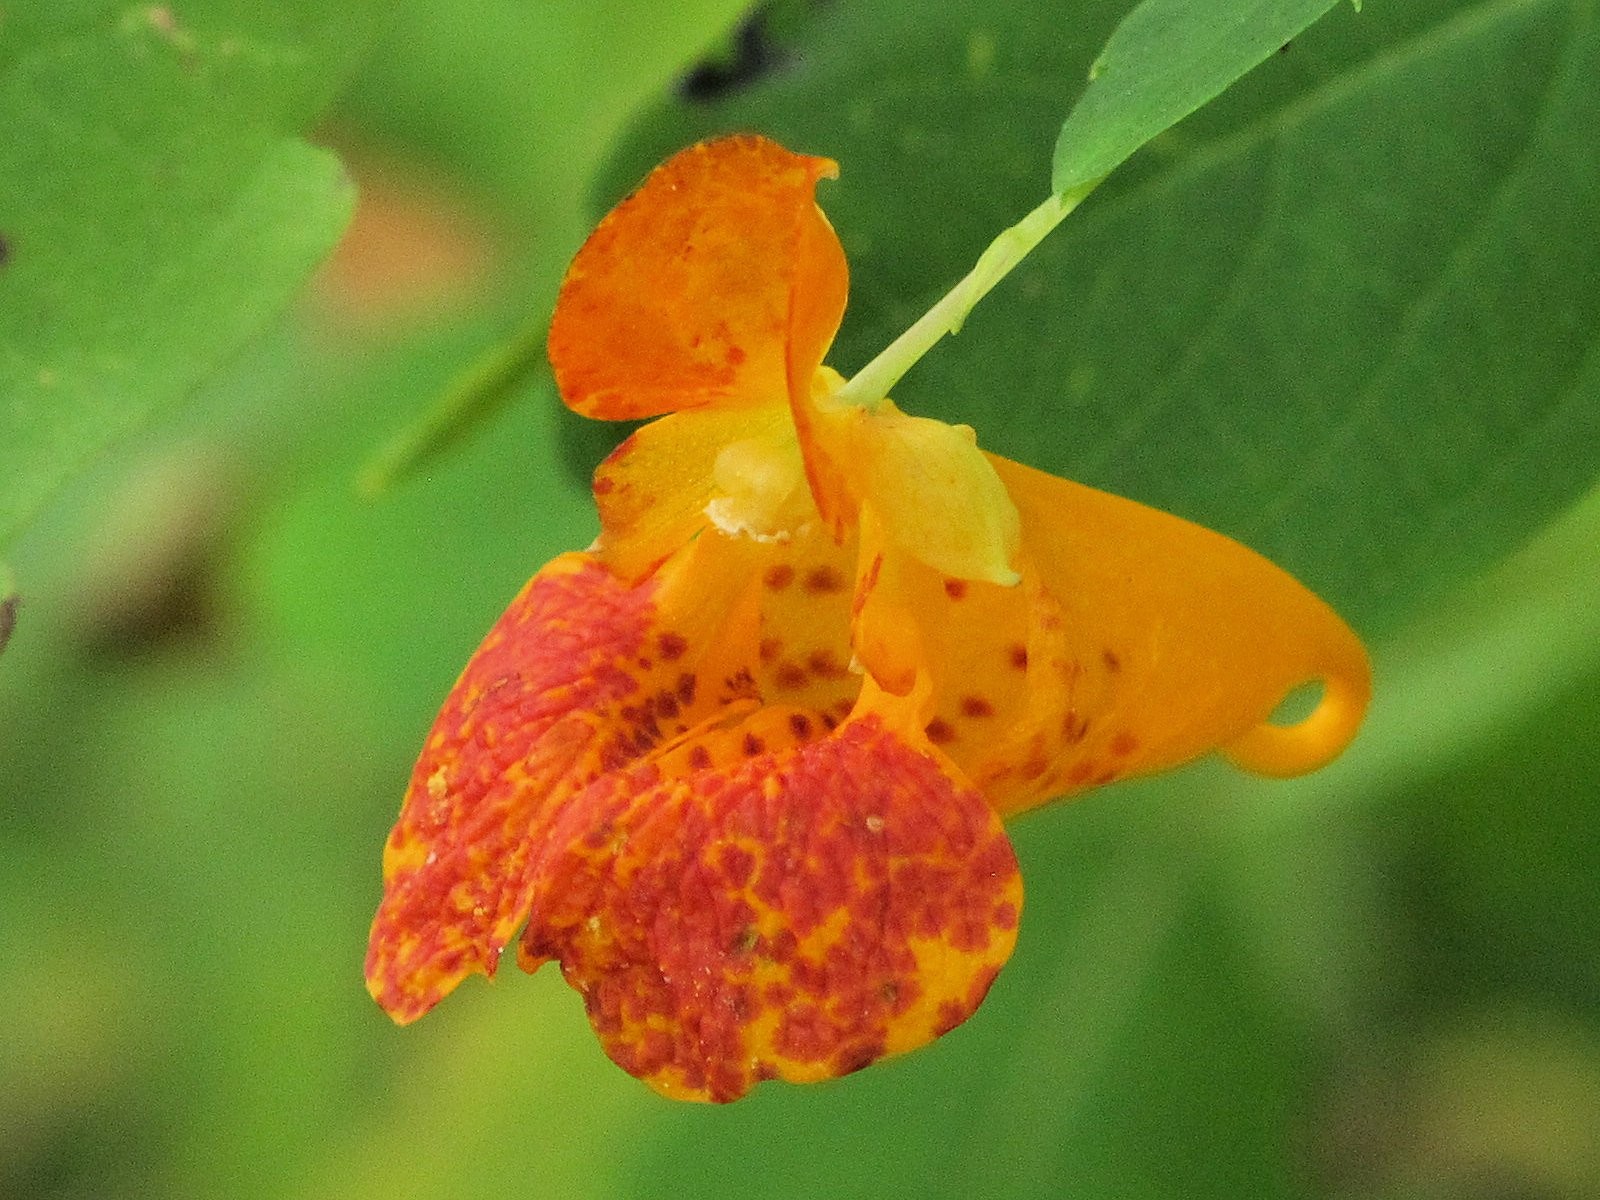 201209021237021 Spotted Touch-Me-Not or Jewel weed (Impatiens capensis) - Bald Mountain R.A., Oakland Co, MI.JPG